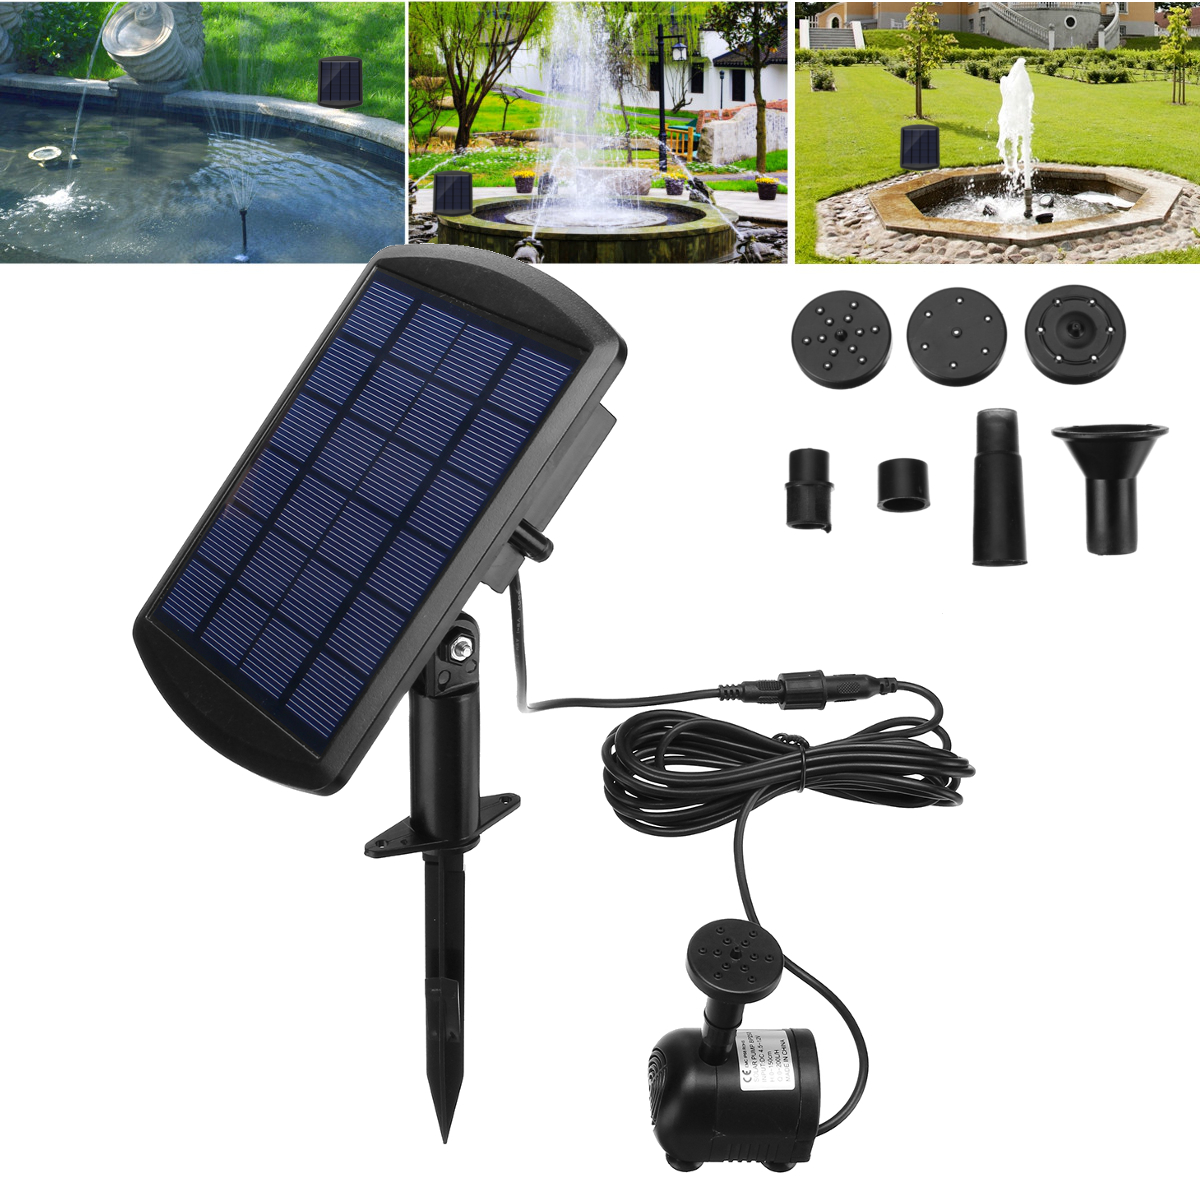 6V-18W-Solar-Panel-Powered-Water-Fountain-Pump-For-Pool-Pond-Garden-Outdoor-Submersible-1473018-6